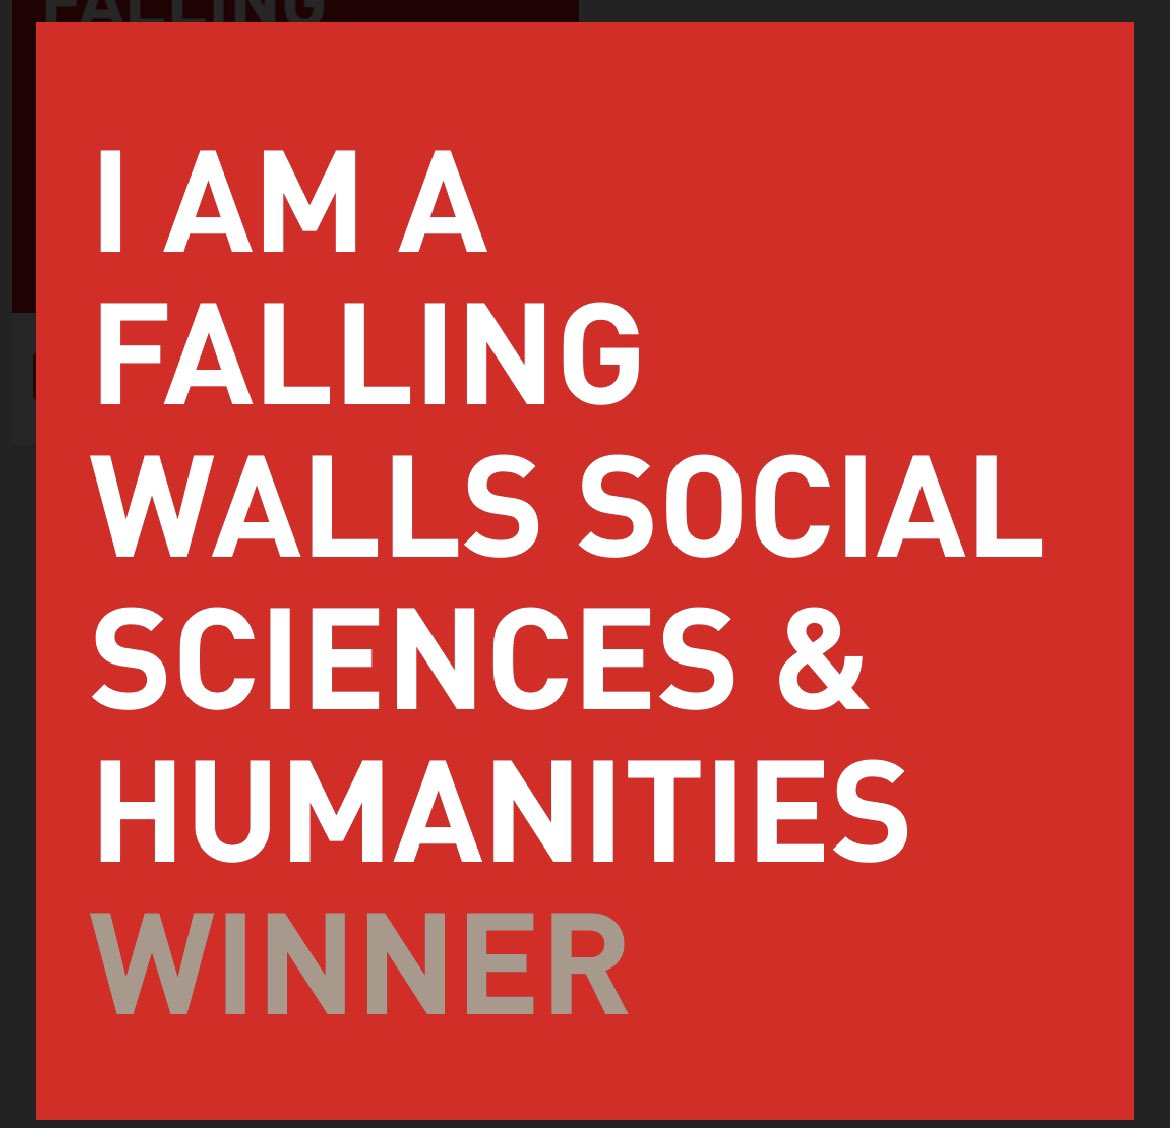 Pleased to find myself among the 10 outstanding winners in the Social Sciences & Humanities category of the @falling_walls #GlobalCall23! Let’s celebrate & aim for the #ScienceBreakthrough of the Year at the #FallingWalls Science Summit from 7-9 November in Berlin, Germany.